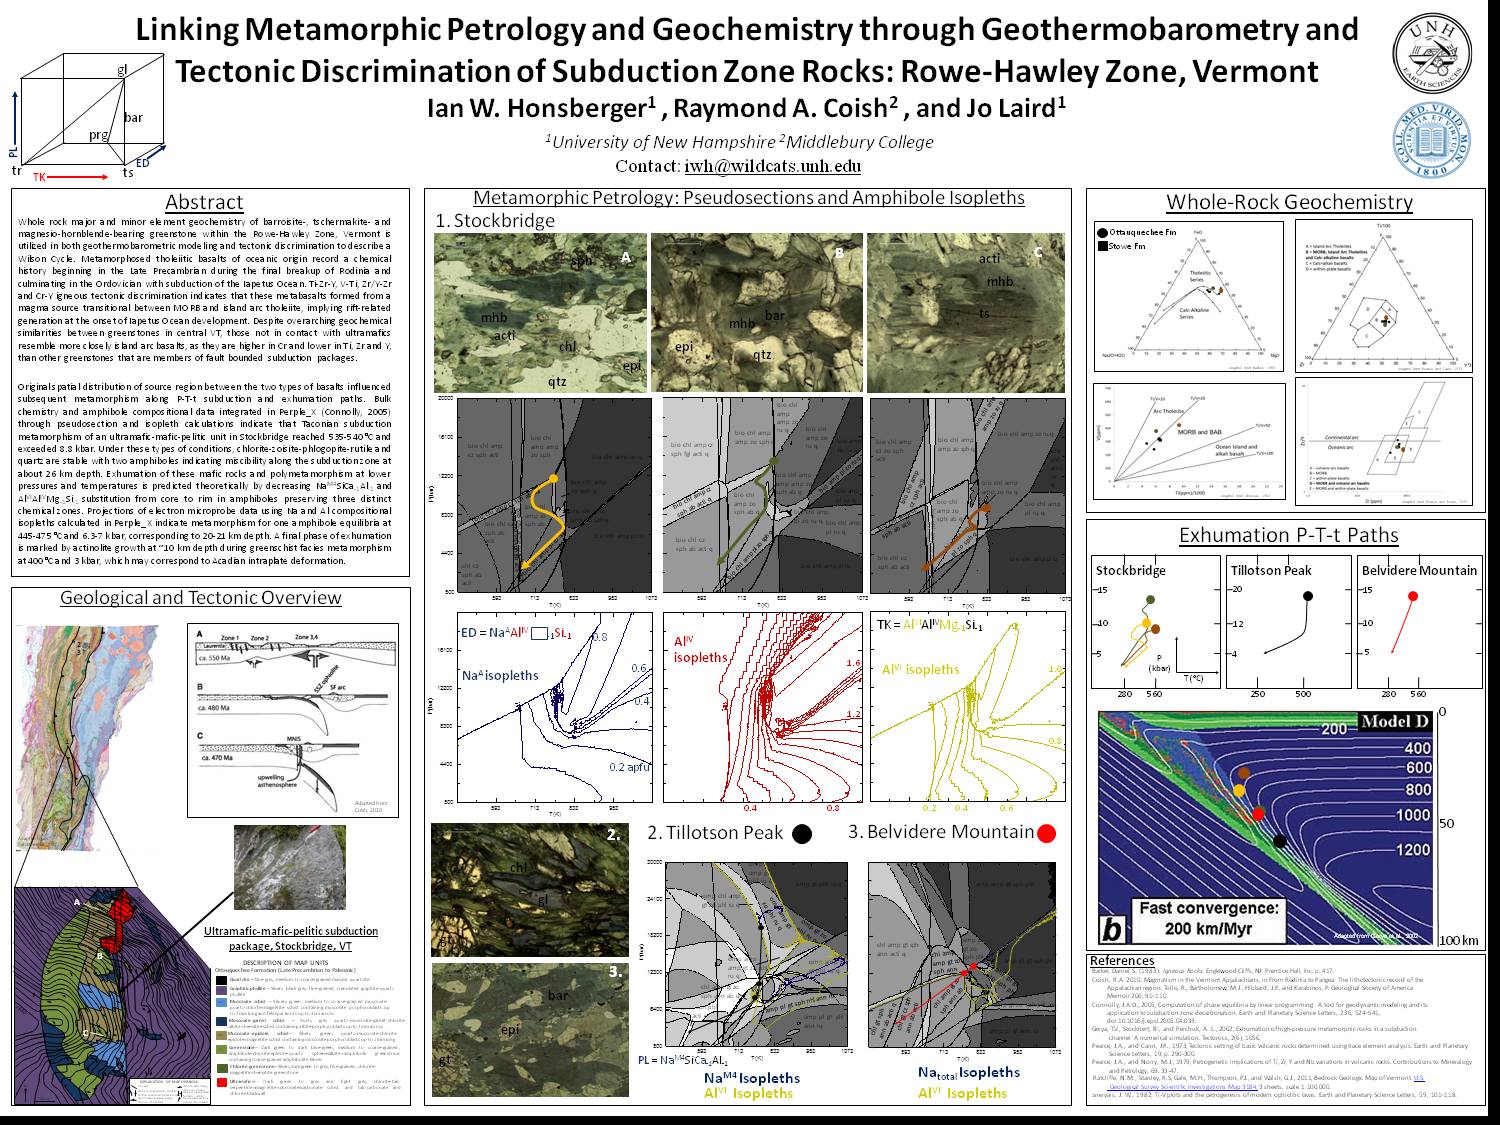 Linking Metamorphic Petrology And Geochemistry Through Geothermobarometry And Tectonic Discrimination Of Subduction Zone Rocks: Rowe-Hawley Zone, Vermont by iwh